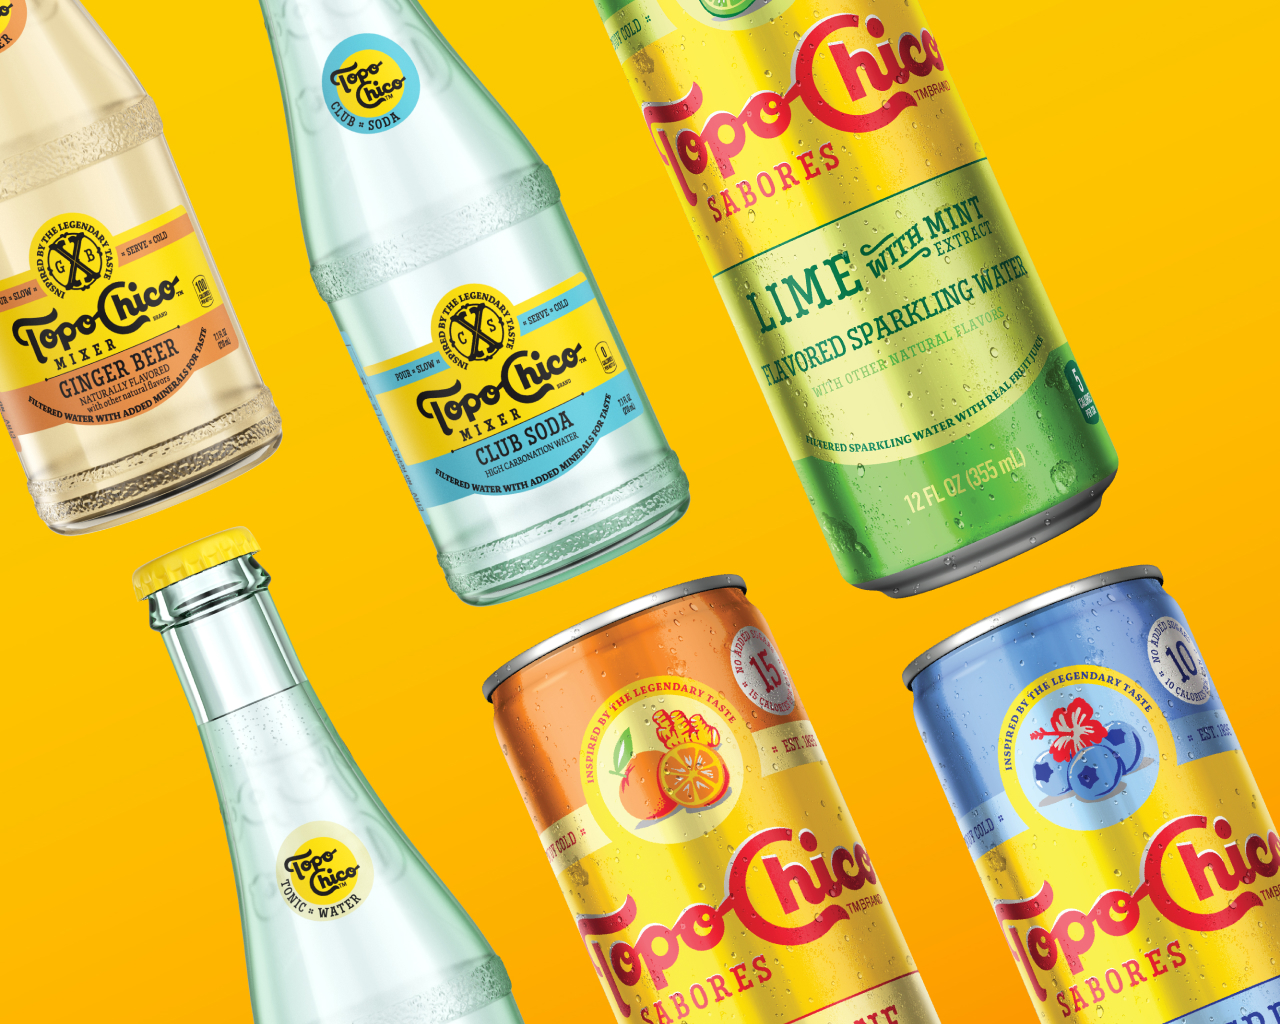 topo chico's mixers and sabores products lined up diagonally